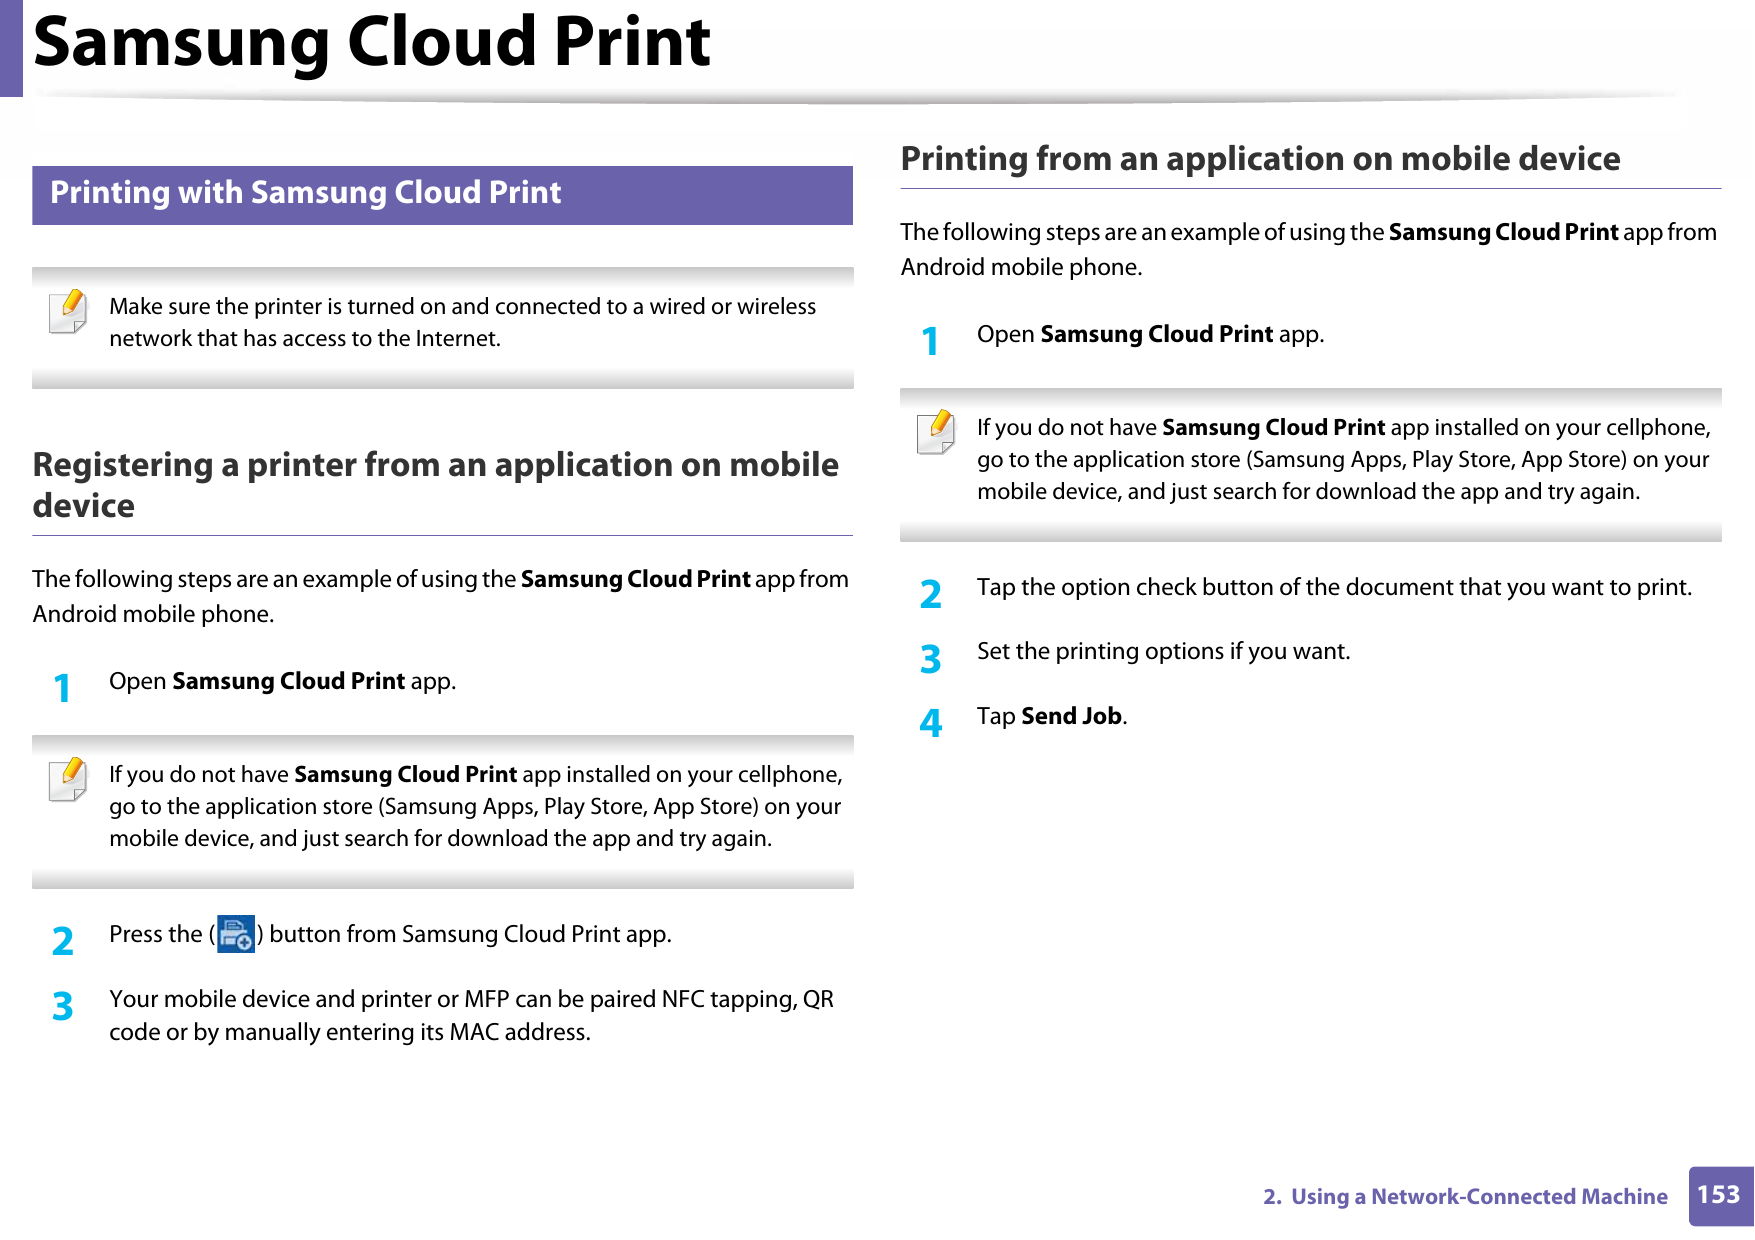 Samsung Cloud Print1532.  Using a Network-Connected Machine35 Printing with Samsung Cloud Print Make sure the printer is turned on and connected to a wired or wireless network that has access to the Internet. Registering a printer from an application on mobile deviceThe following steps are an example of using the Samsung Cloud Print app from Android mobile phone.1Open Samsung Cloud Print app. If you do not have Samsung Cloud Print app installed on your cellphone, go to the application store (Samsung Apps, Play Store, App Store) on your mobile device, and just search for download the app and try again. 2  Press the ( ) button from Samsung Cloud Print app.3  Your mobile device and printer or MFP can be paired NFC tapping, QR code or by manually entering its MAC address.Printing from an application on mobile deviceThe following steps are an example of using the Samsung Cloud Print app from Android mobile phone.1Open Samsung Cloud Print app. If you do not have Samsung Cloud Print app installed on your cellphone, go to the application store (Samsung Apps, Play Store, App Store) on your mobile device, and just search for download the app and try again. 2  Tap the option check button of the document that you want to print.3  Set the printing options if you want.4  Tap Send Job.